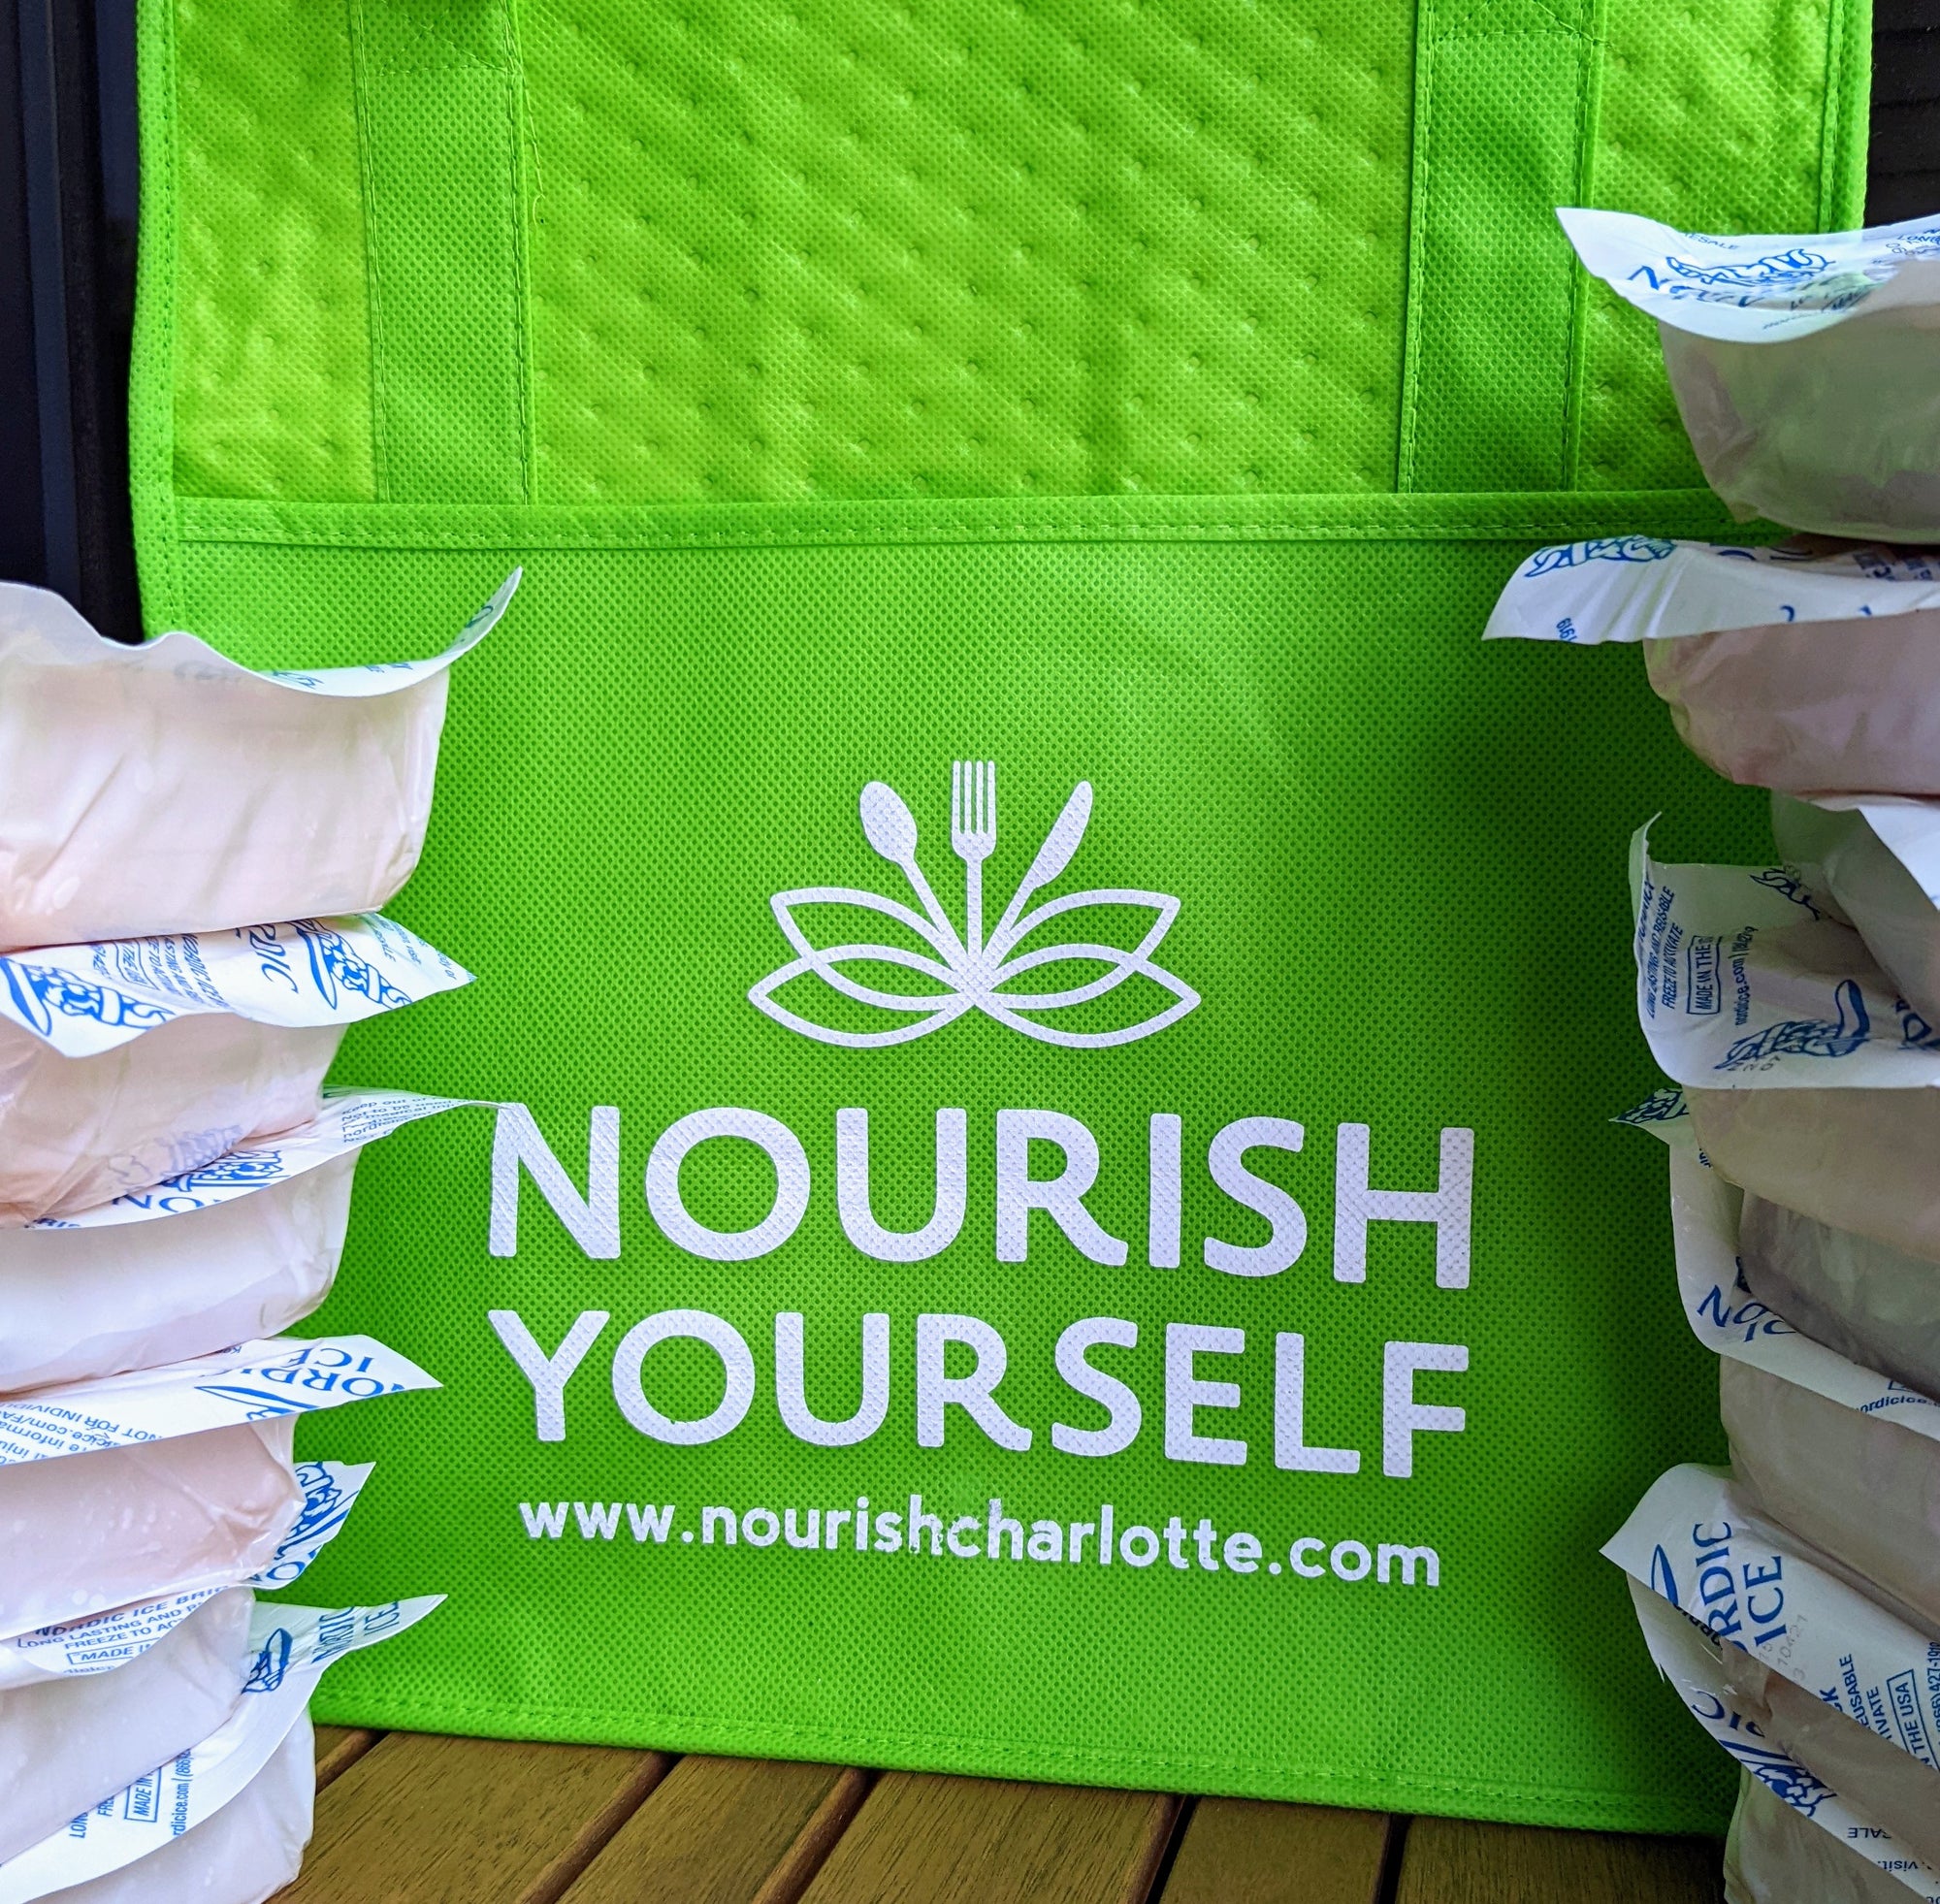 It's Getting Warmer - How To Keep Your Nourish Fresh On Delivery Day!